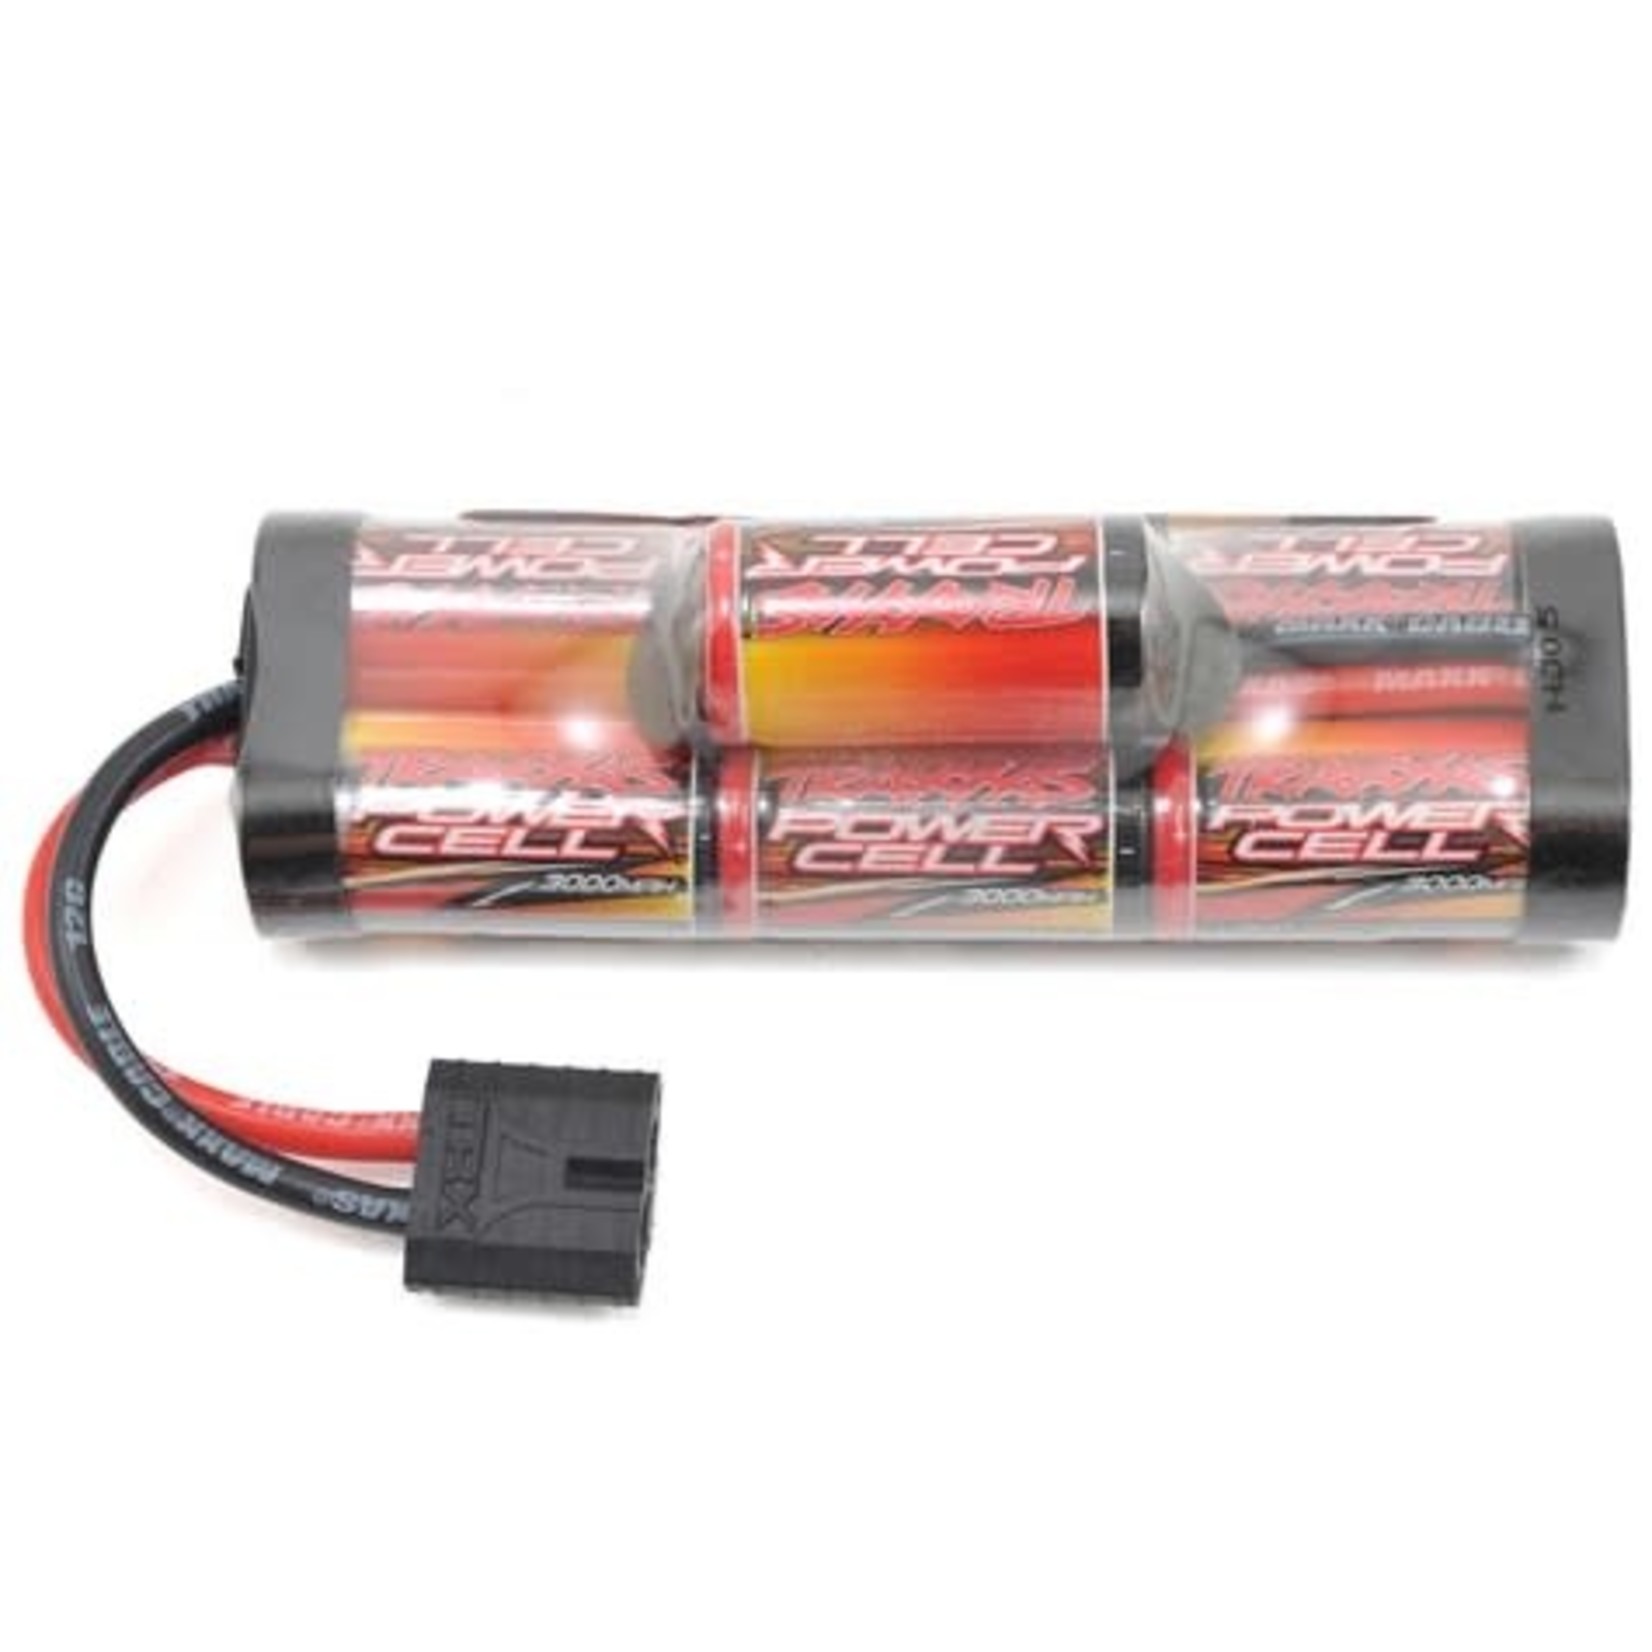 Traxxas Traxxas Power Cell 7 Cell Hump NiMH Battery Pack w/iD Connector (8.4V/3000mAh) #2926X